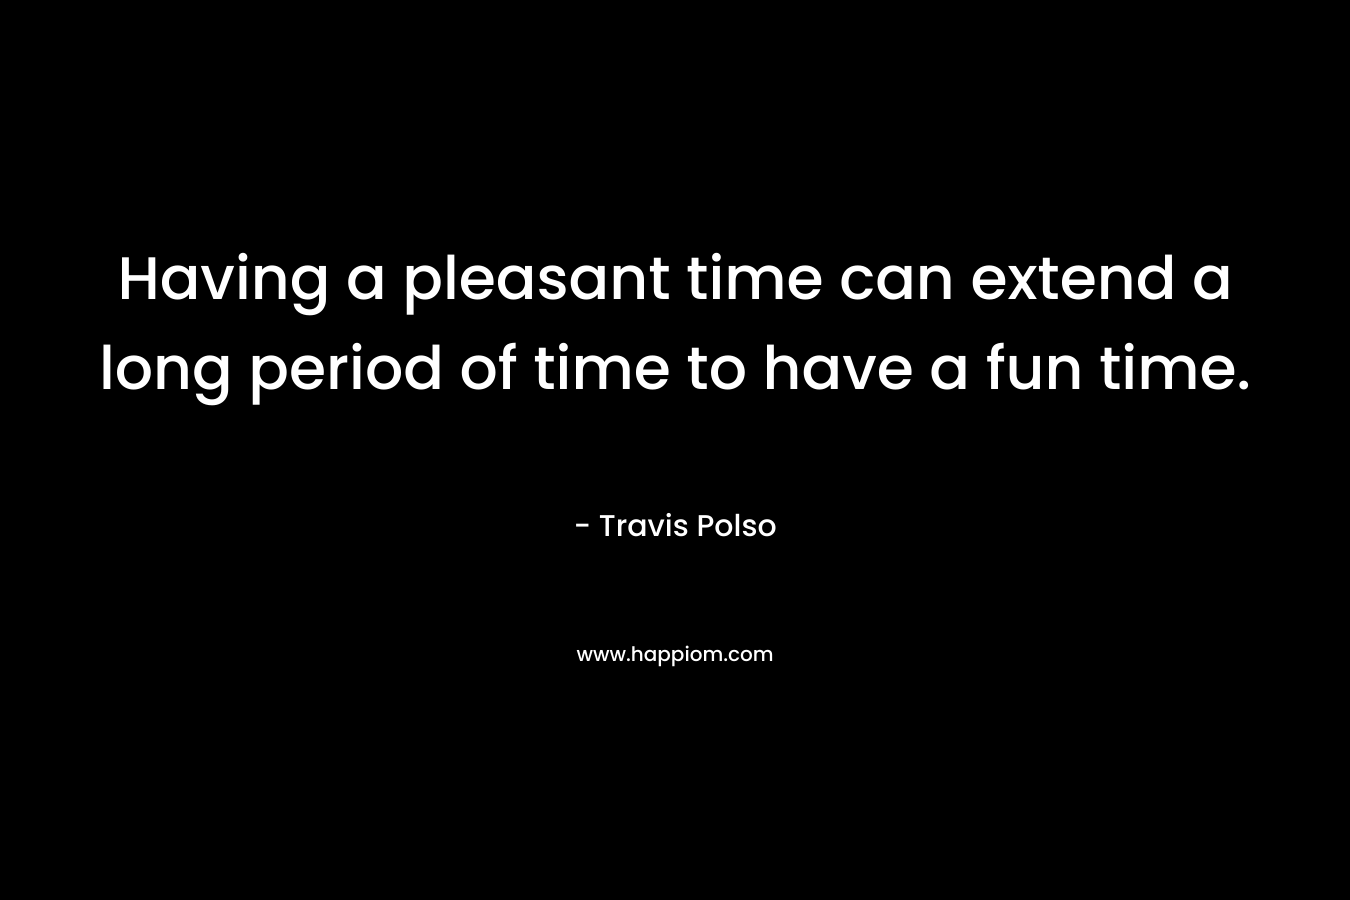 Having a pleasant time can extend a long period of time to have a fun time. – Travis Polso